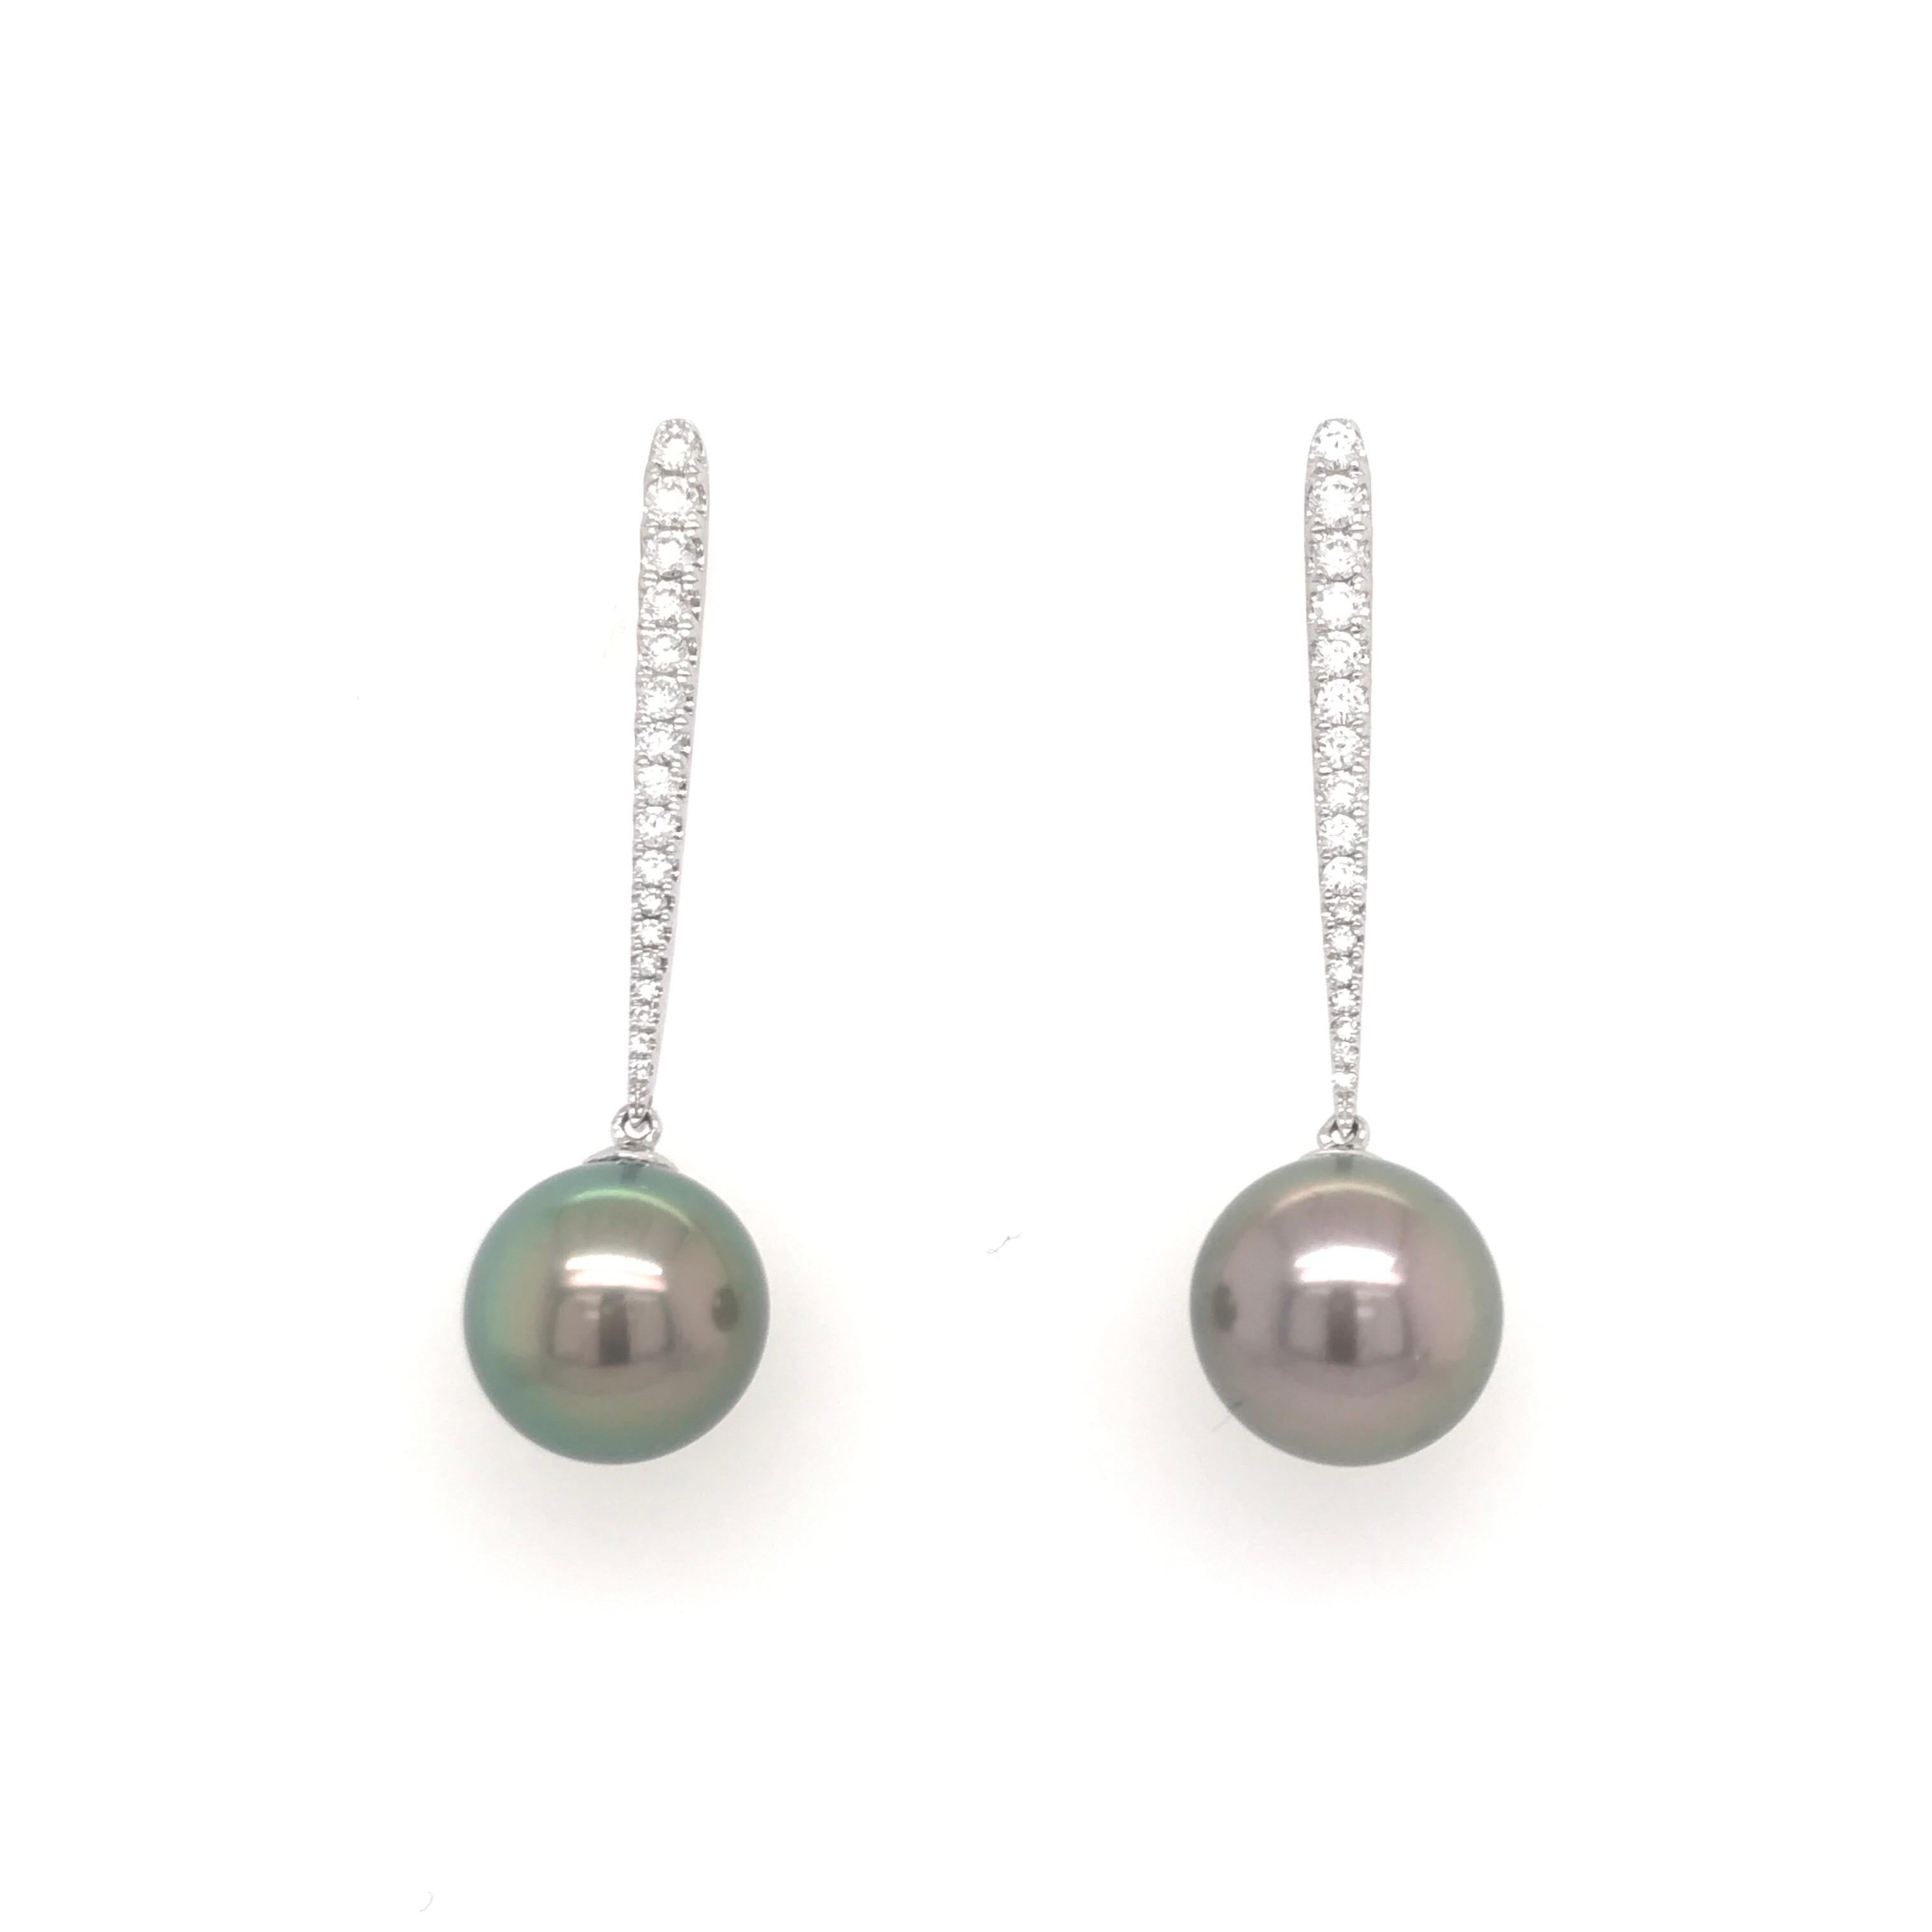 18K White Gold drop earrings featuring two Tahitian pearls measuring 10-11 mm with a diamond bar weighing 0.43 carats.
Color G-H
Clarity SI

Comes in yellow and white gold and can customize any color pearl! 